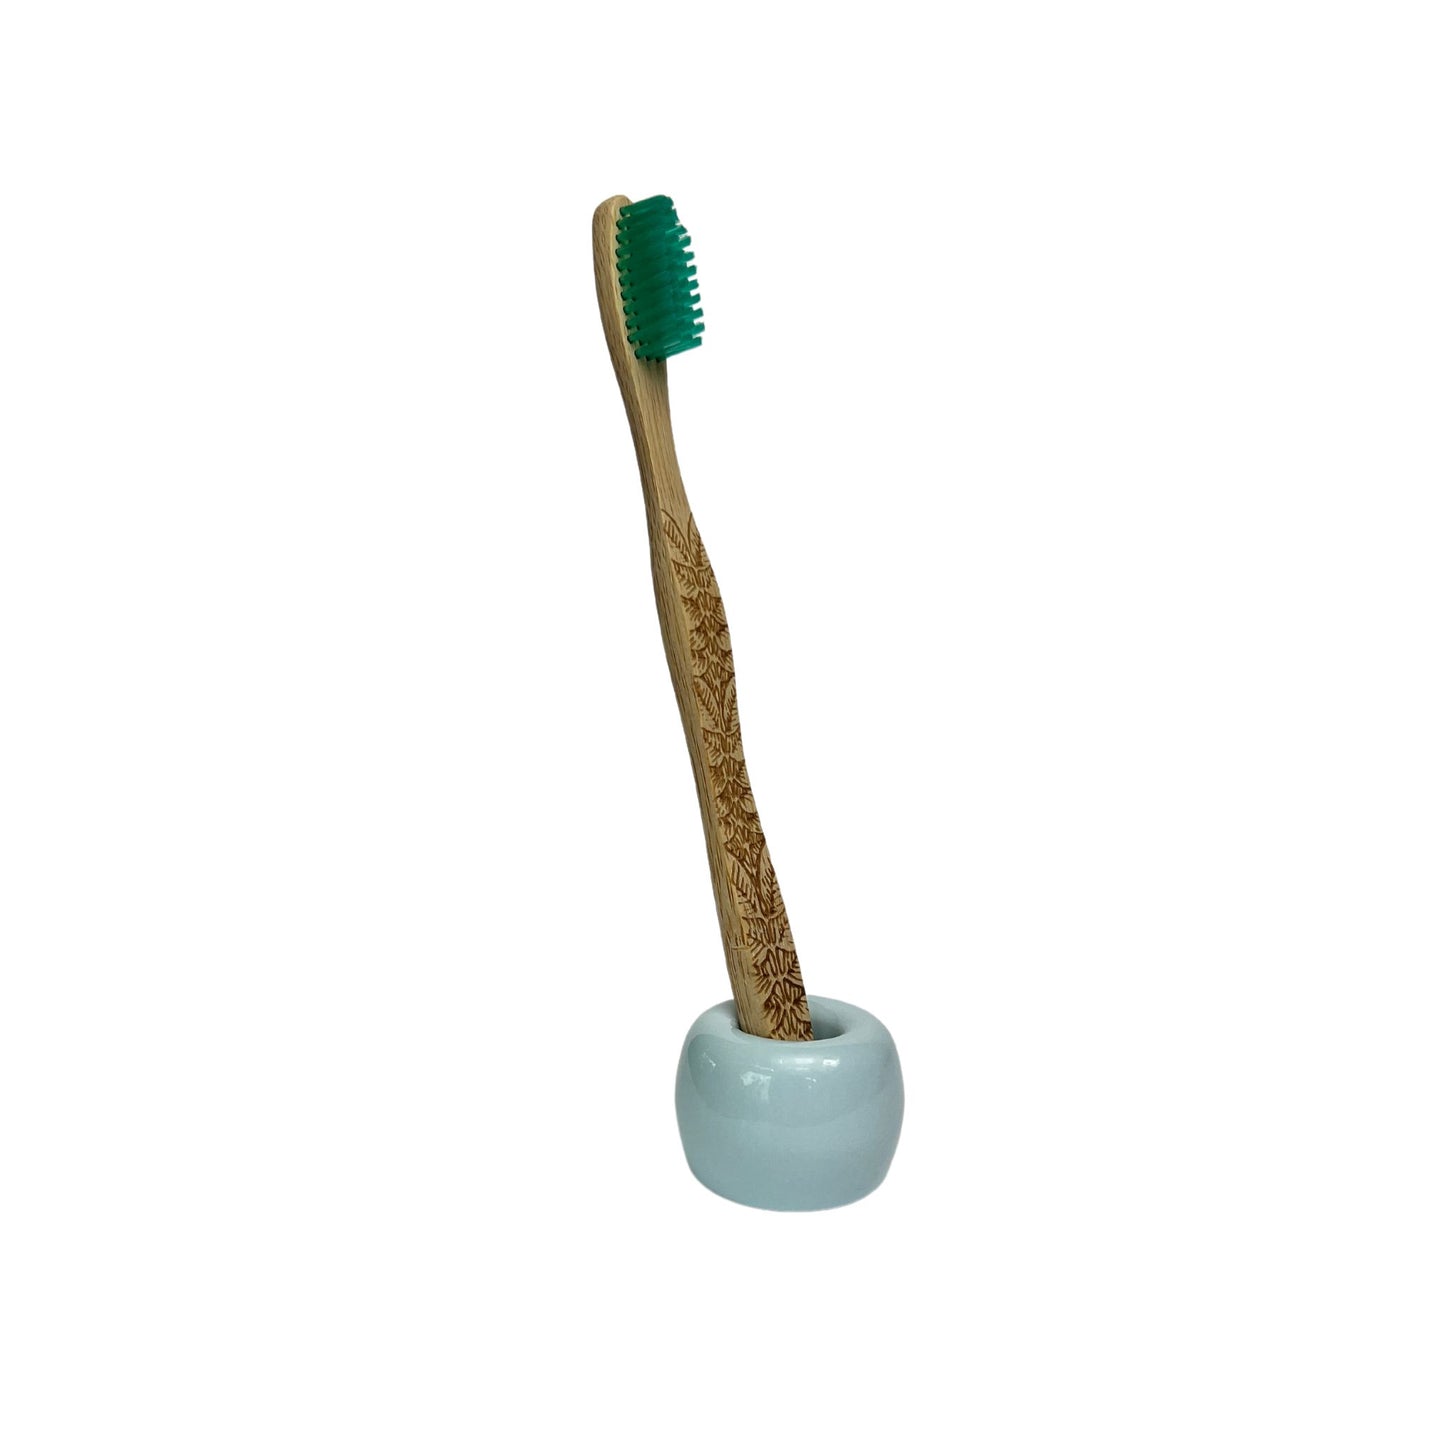 small ceramic toothbrush holder in glossy blue finish holding a bamboo toothbrush